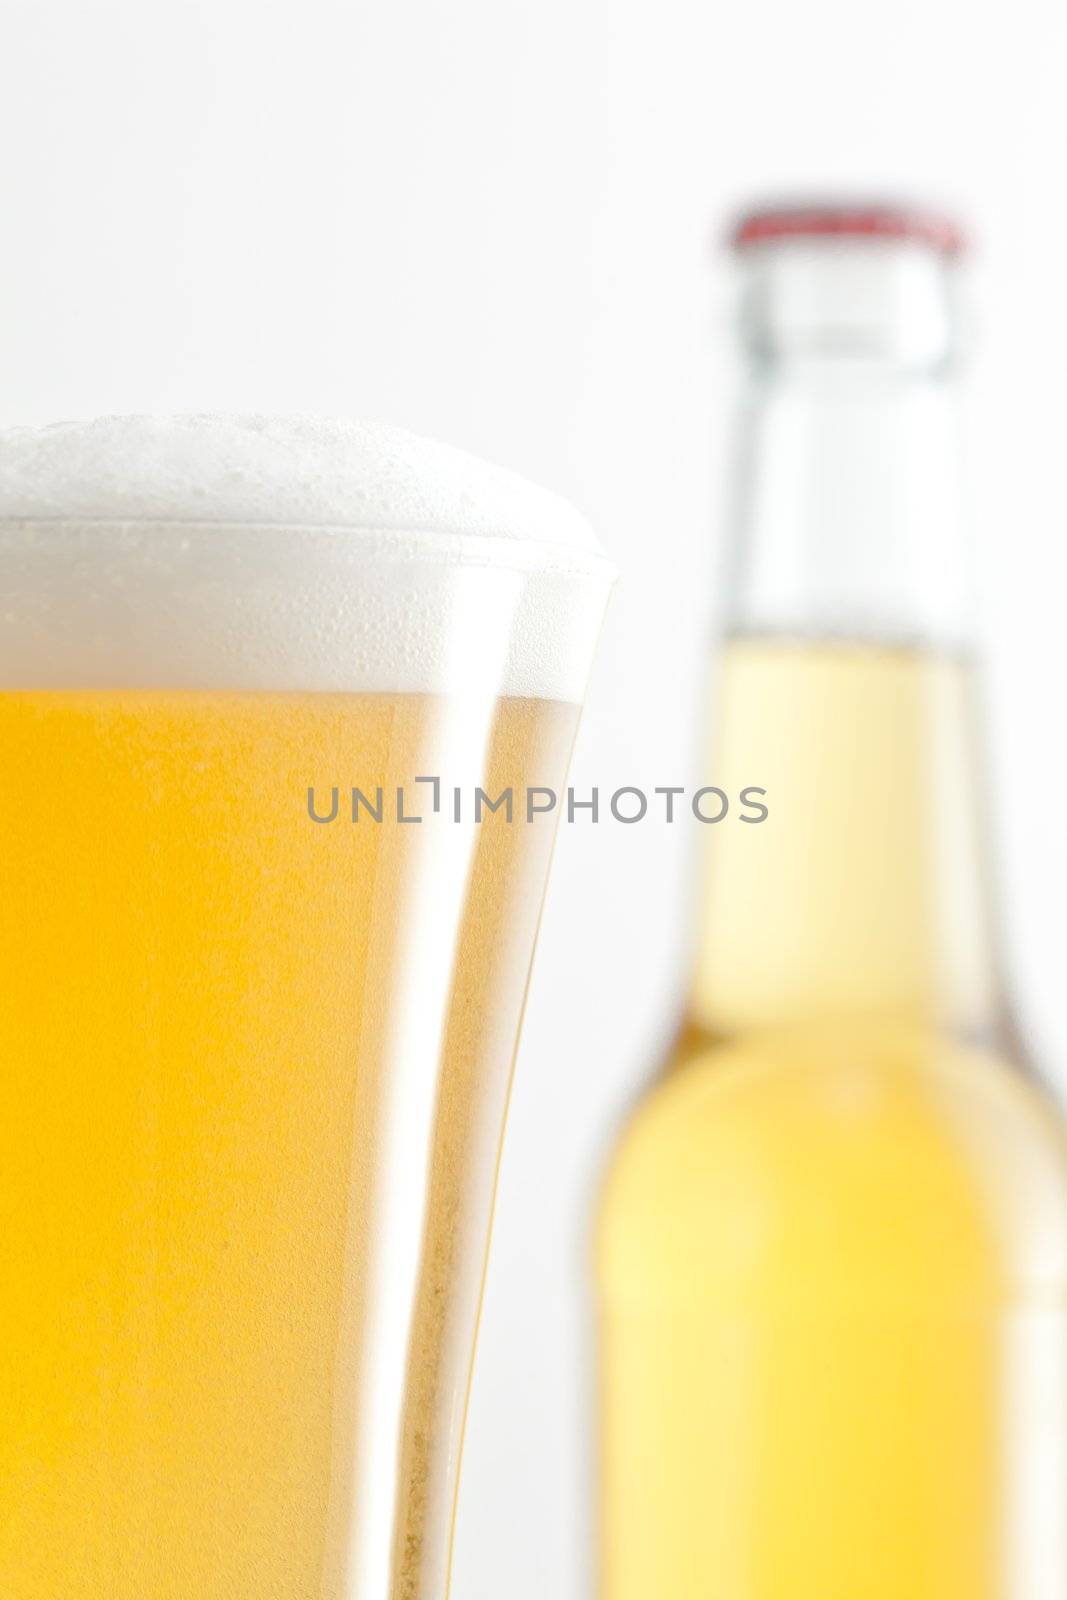 Bottle and glass of beer against a white background by Wavebreakmedia